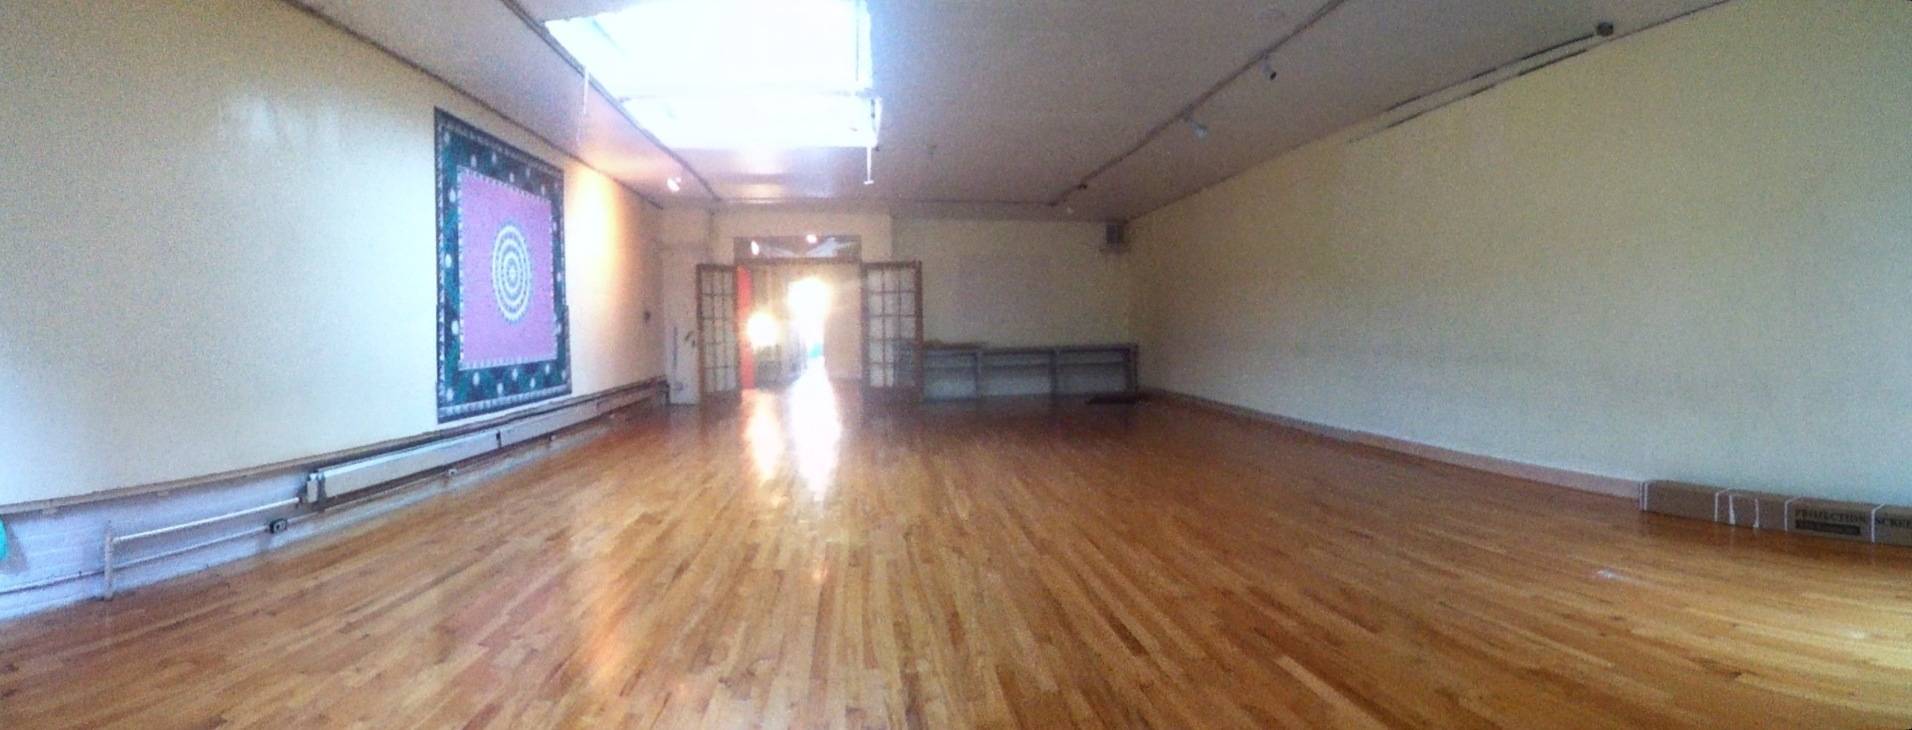 Gorgeous Dance Studio or Daycare Center